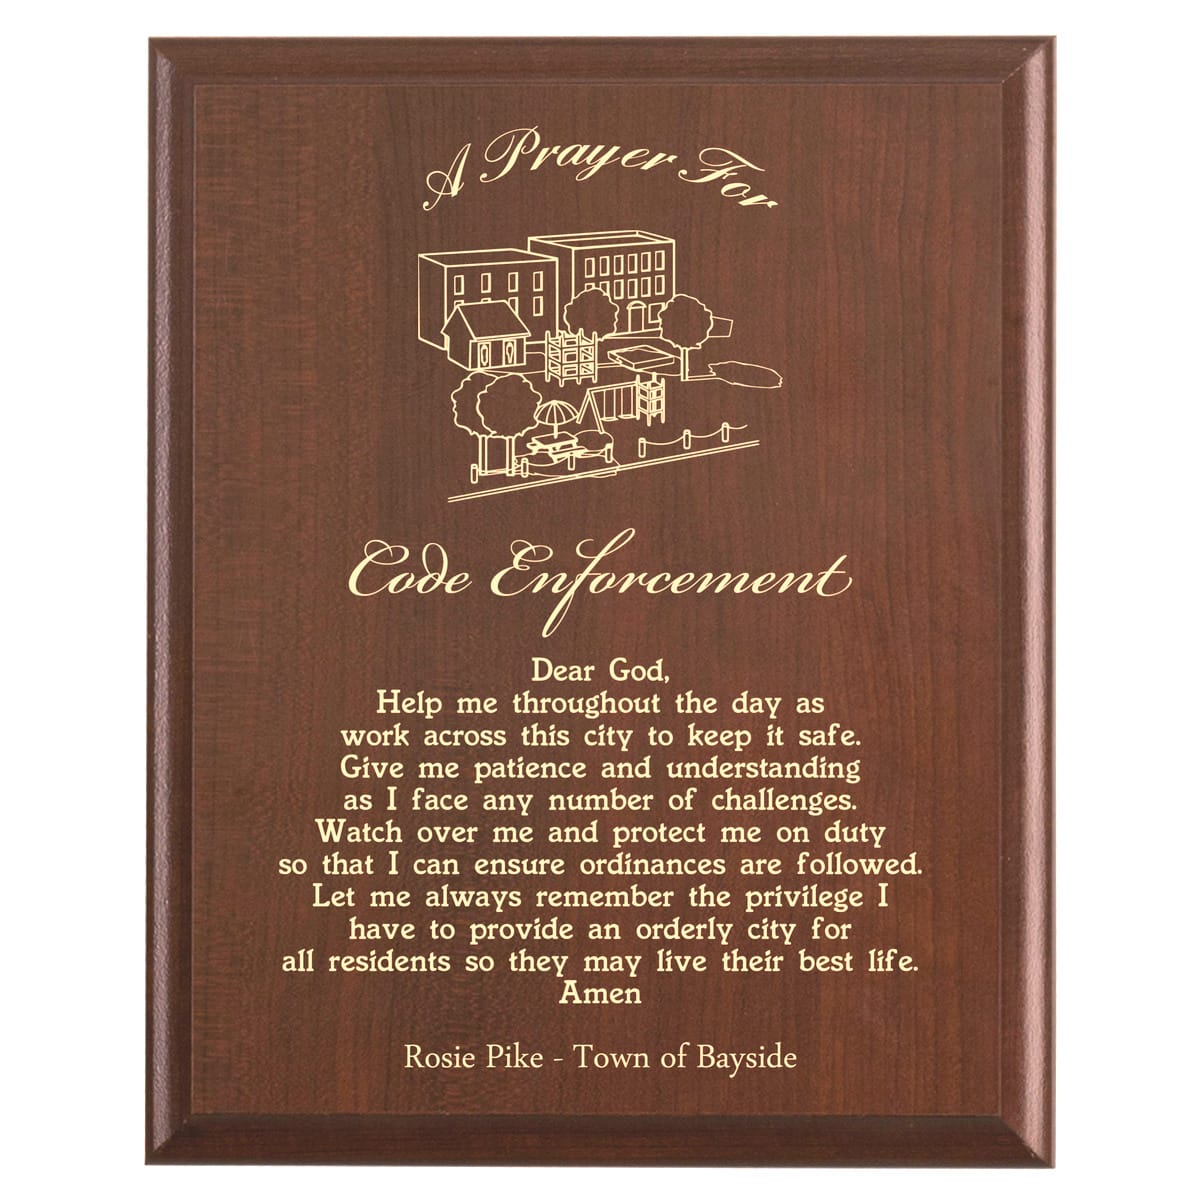 Plaque photo: Code Enforcement Prayer Plaque design with free personalization. Wood style finish with customized text.